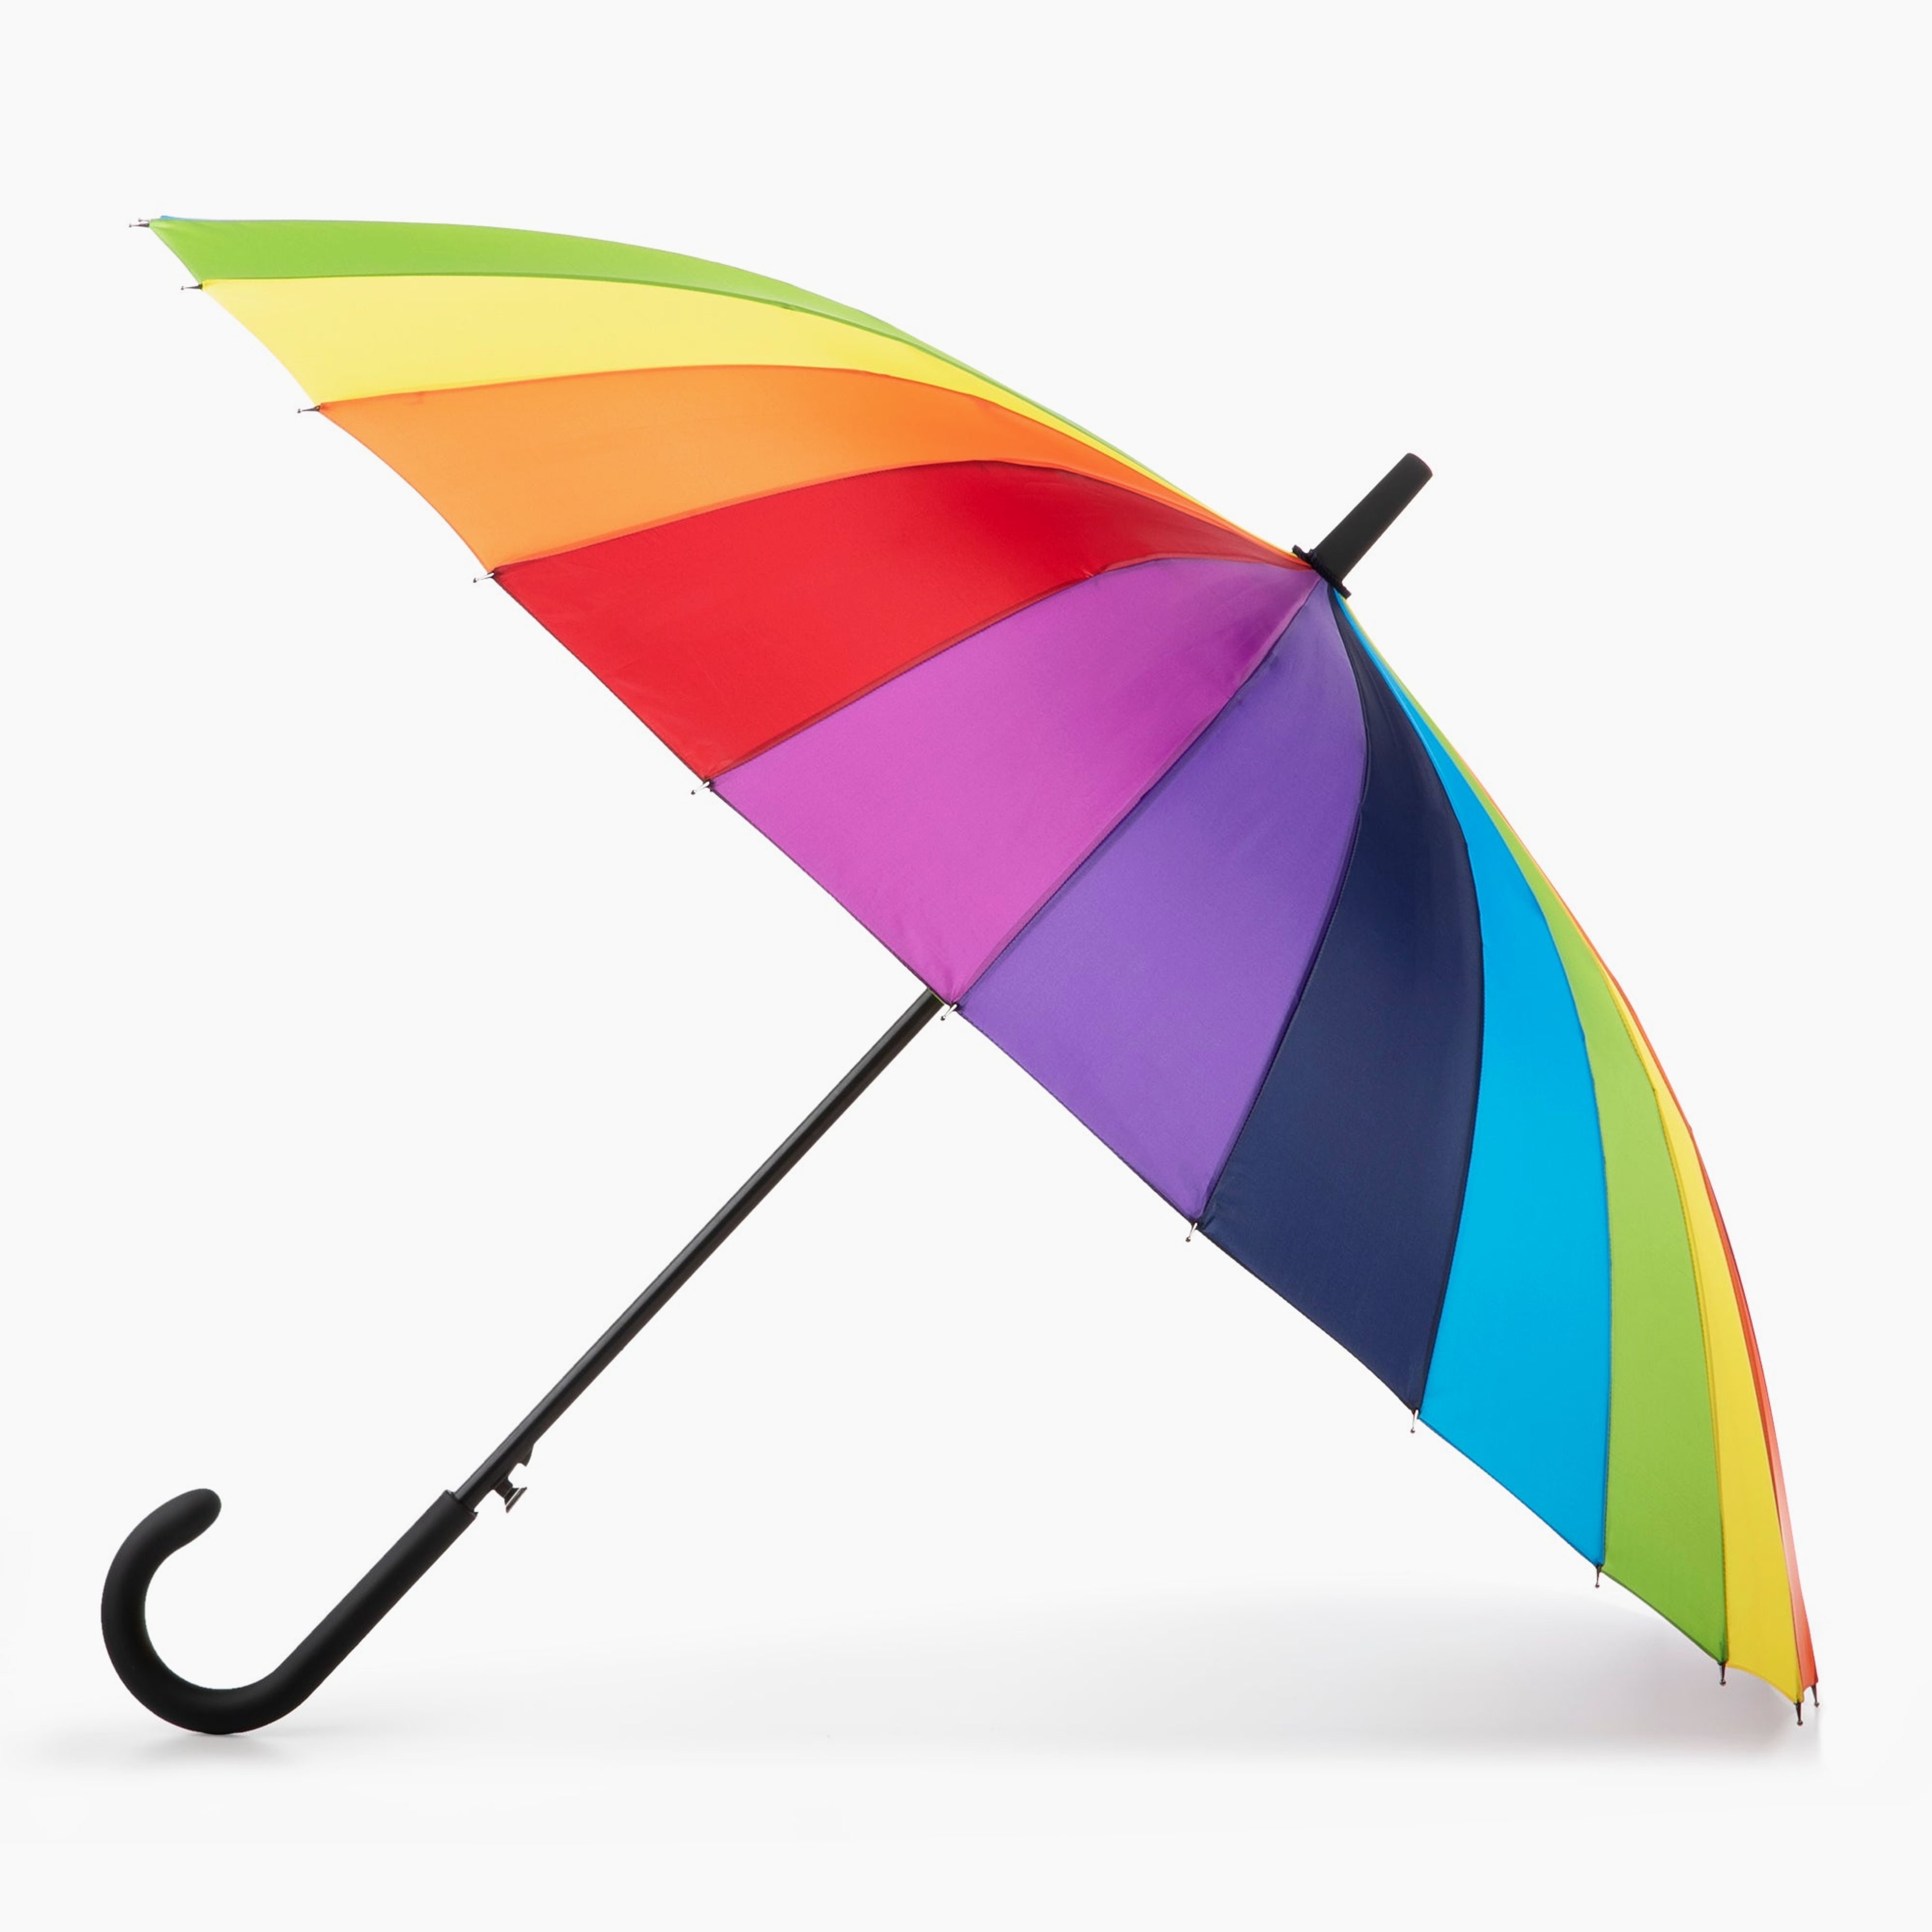 Recycled 24 Rib Stick Umbrella with Auto Open Technology